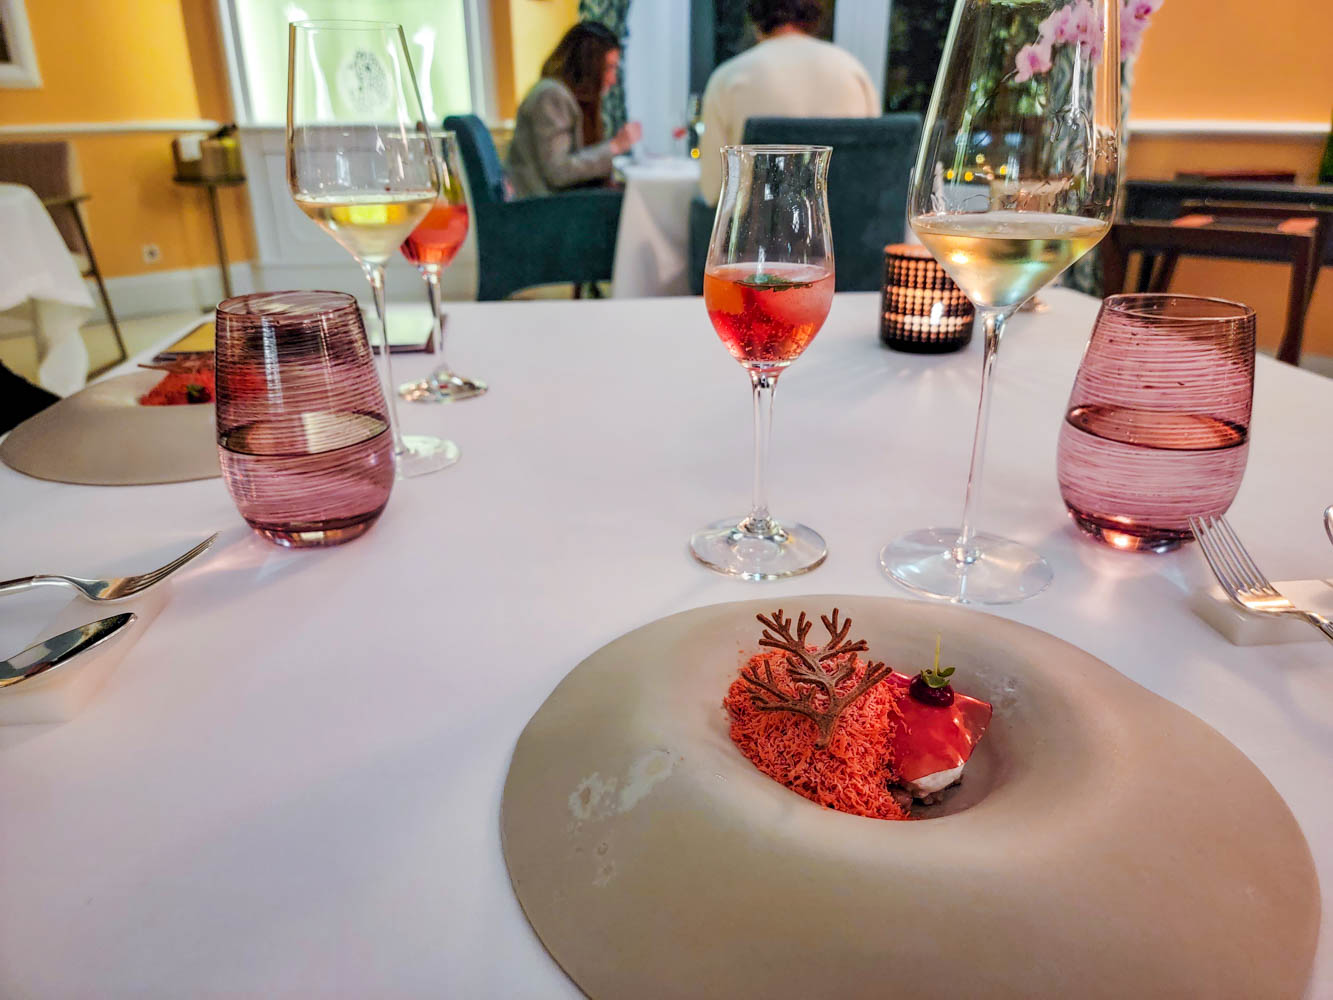 Prix Fixe Dining at The Yeatman in Porto